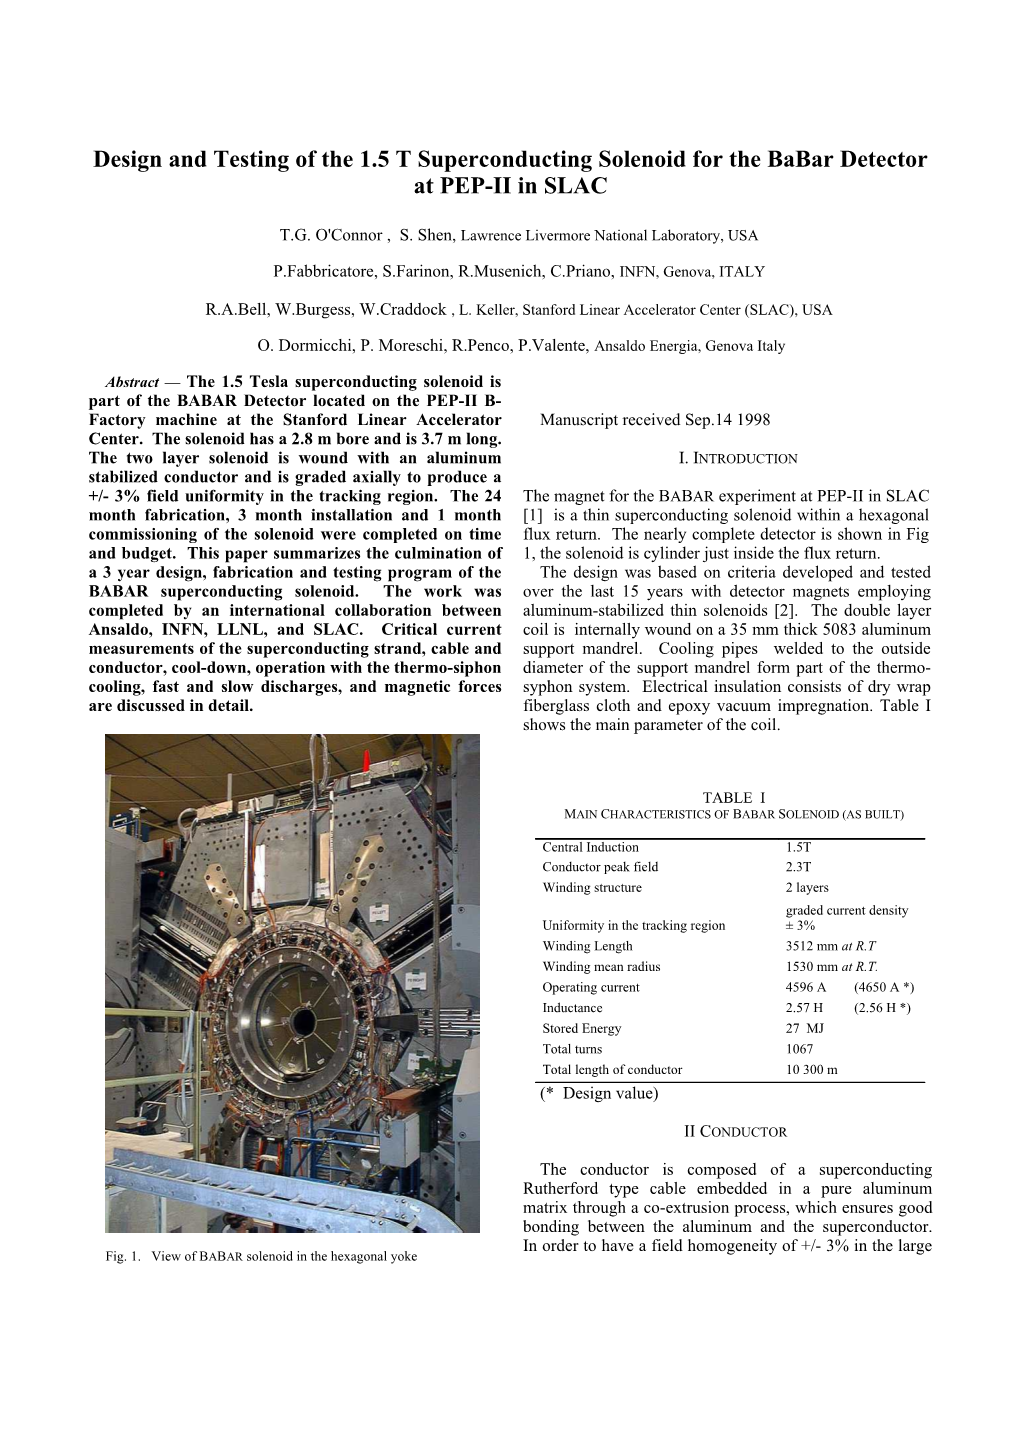 The Superconducting Magnet for the BABAR Detector of the PEP-II